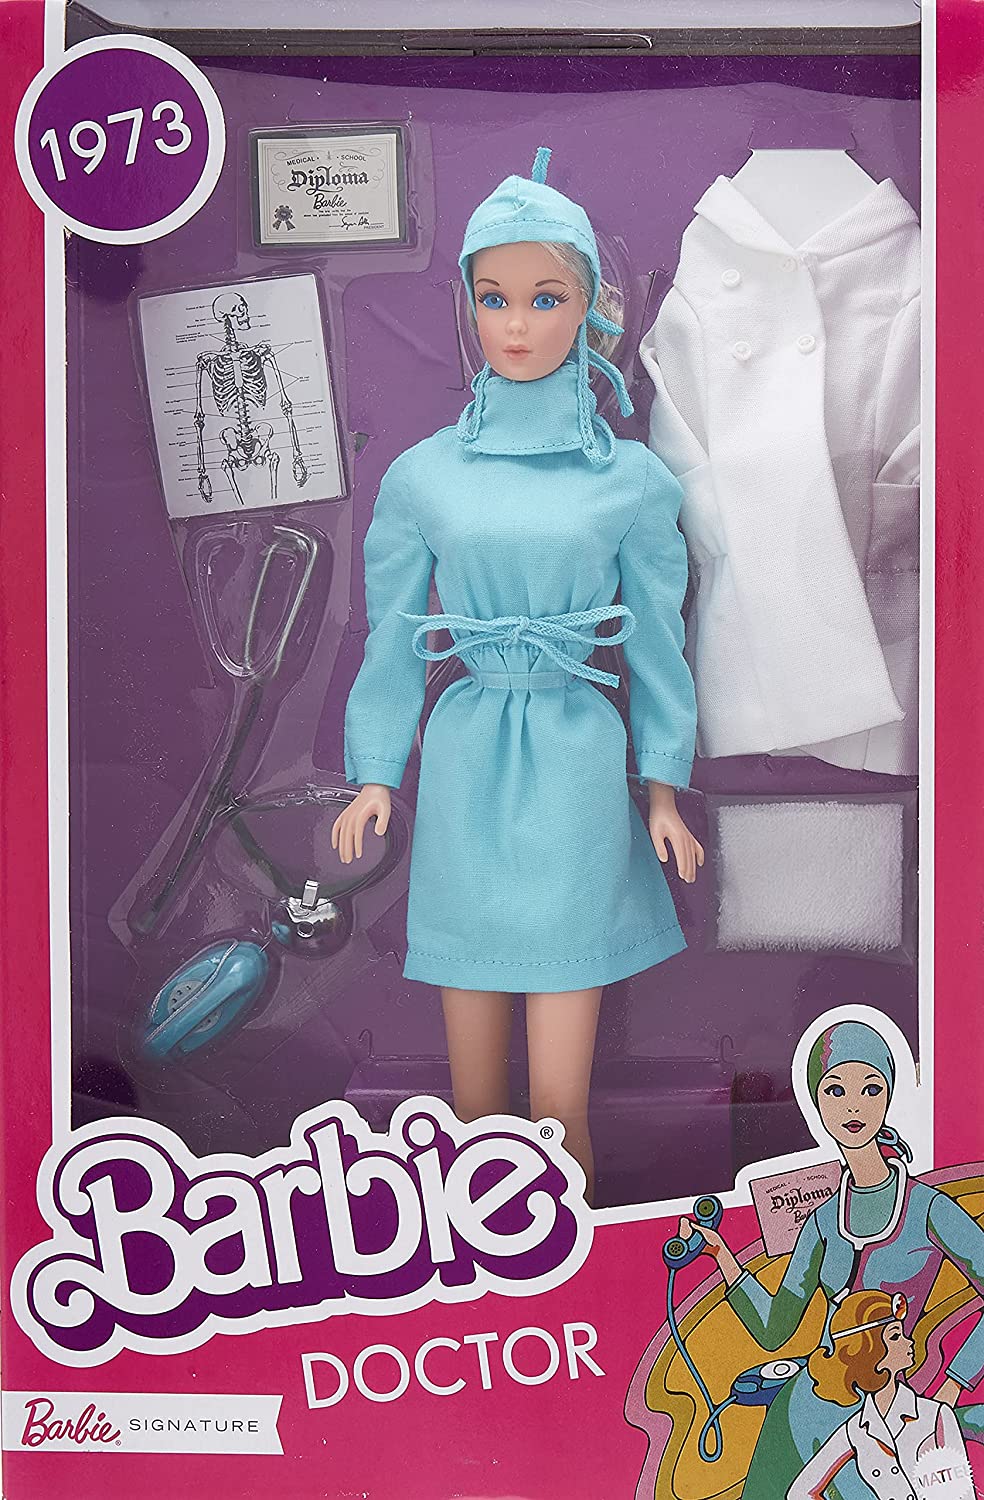 Barbie Signature Doctor 1973 doll reproduction -